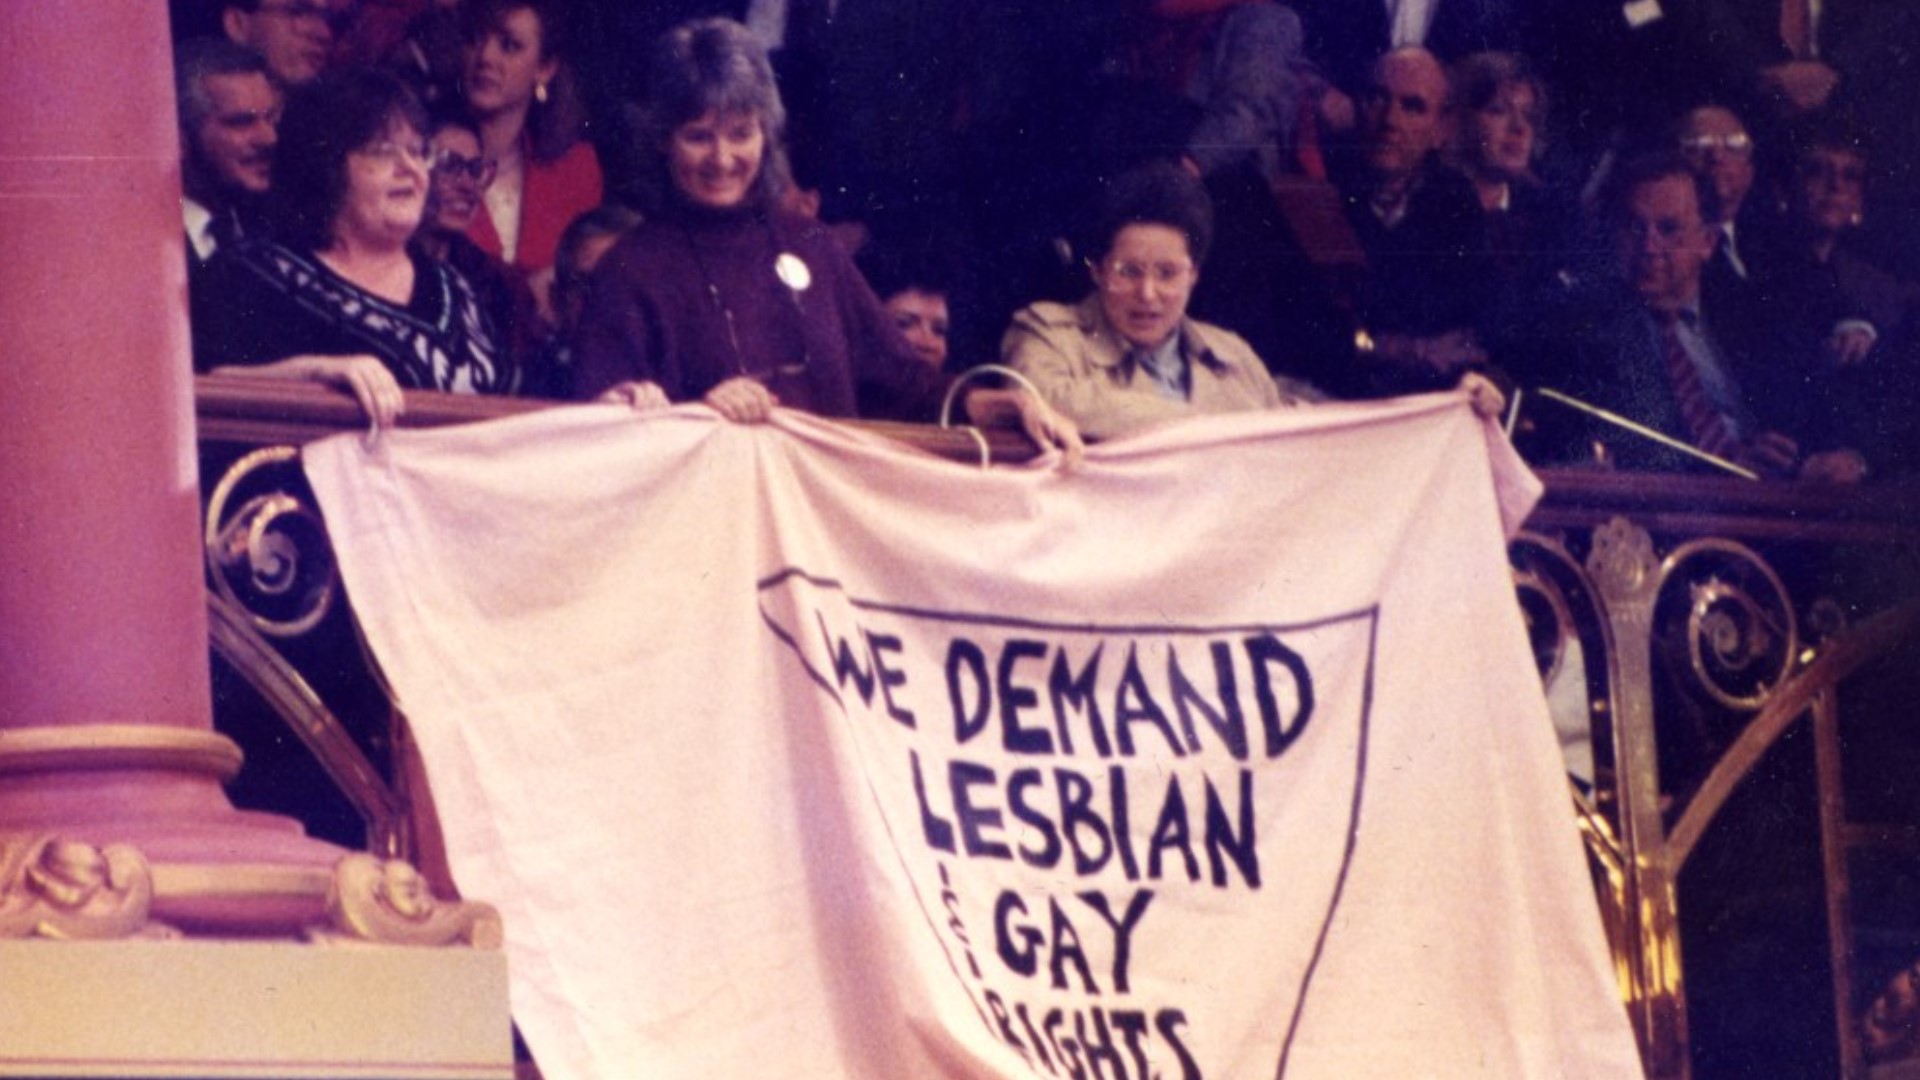 From being on the outside to being on the inside, we're looking back on the push for equality.